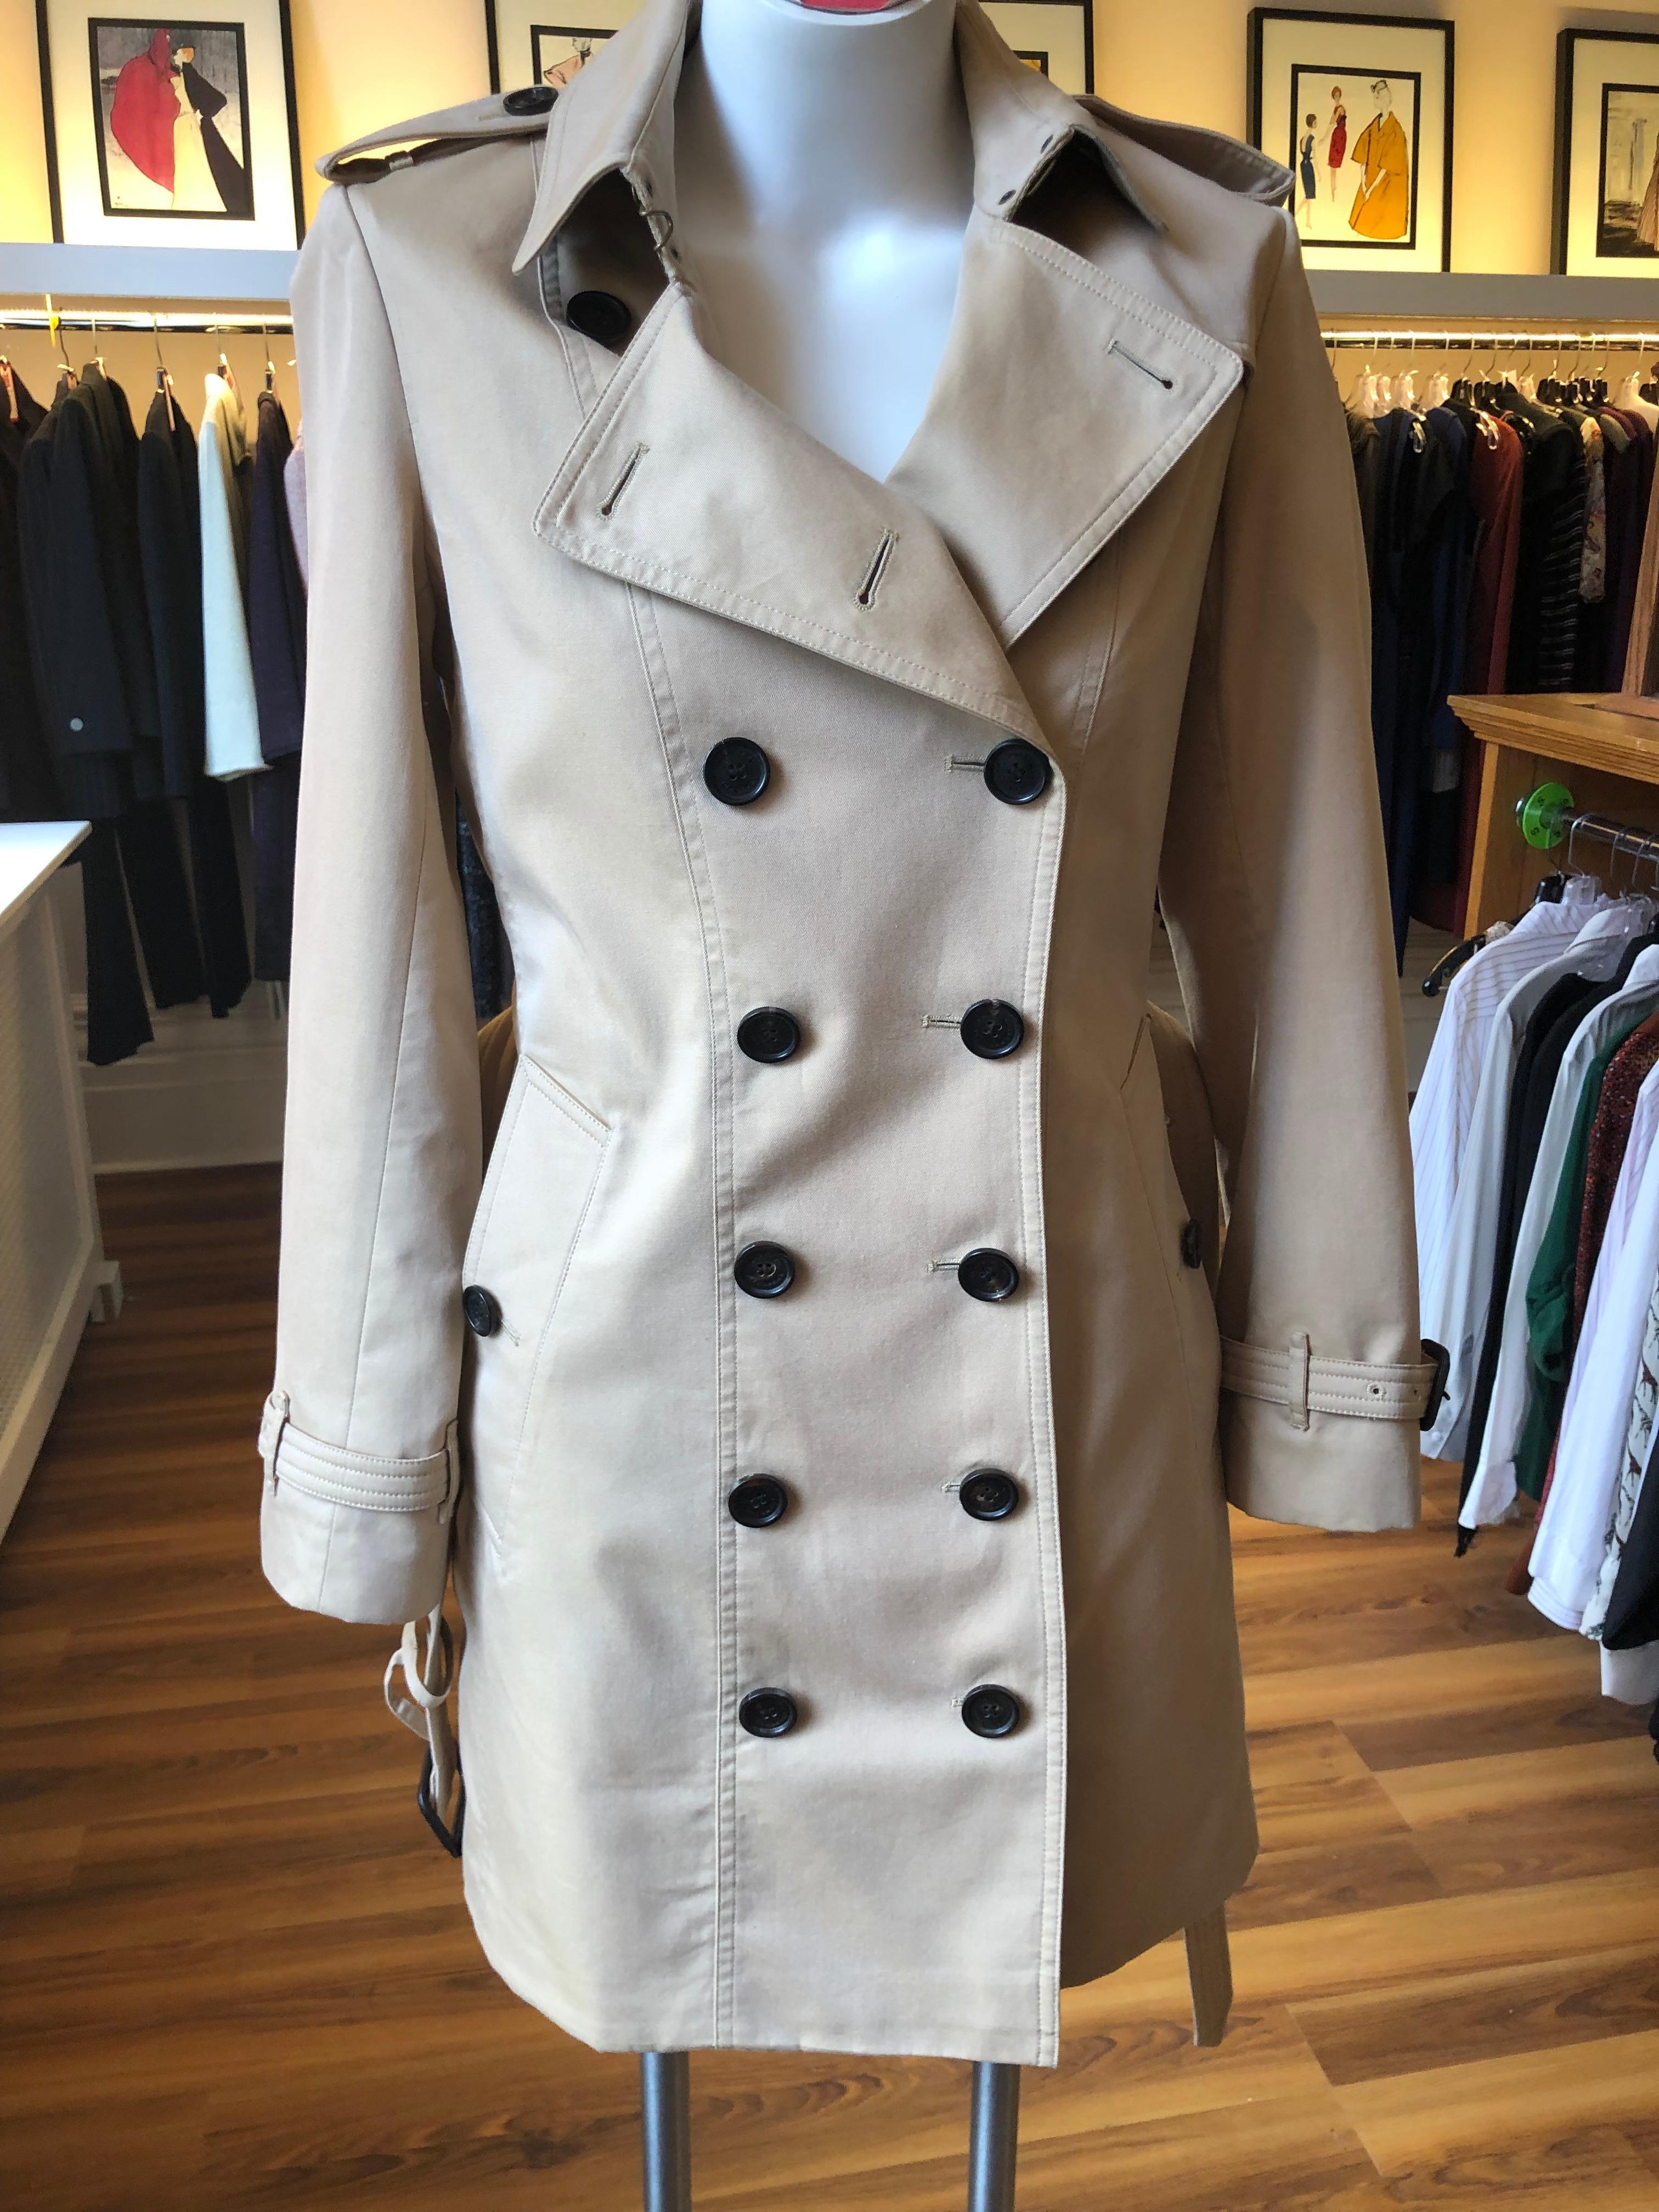 The Sandringham is one of the three Burberry Heritage Collection trench  coats. It is made of water repellent cotton gabardine. It is a tailored-fit trench coat which is cut to contour the body for a streamlined look. 
It is a classic all season